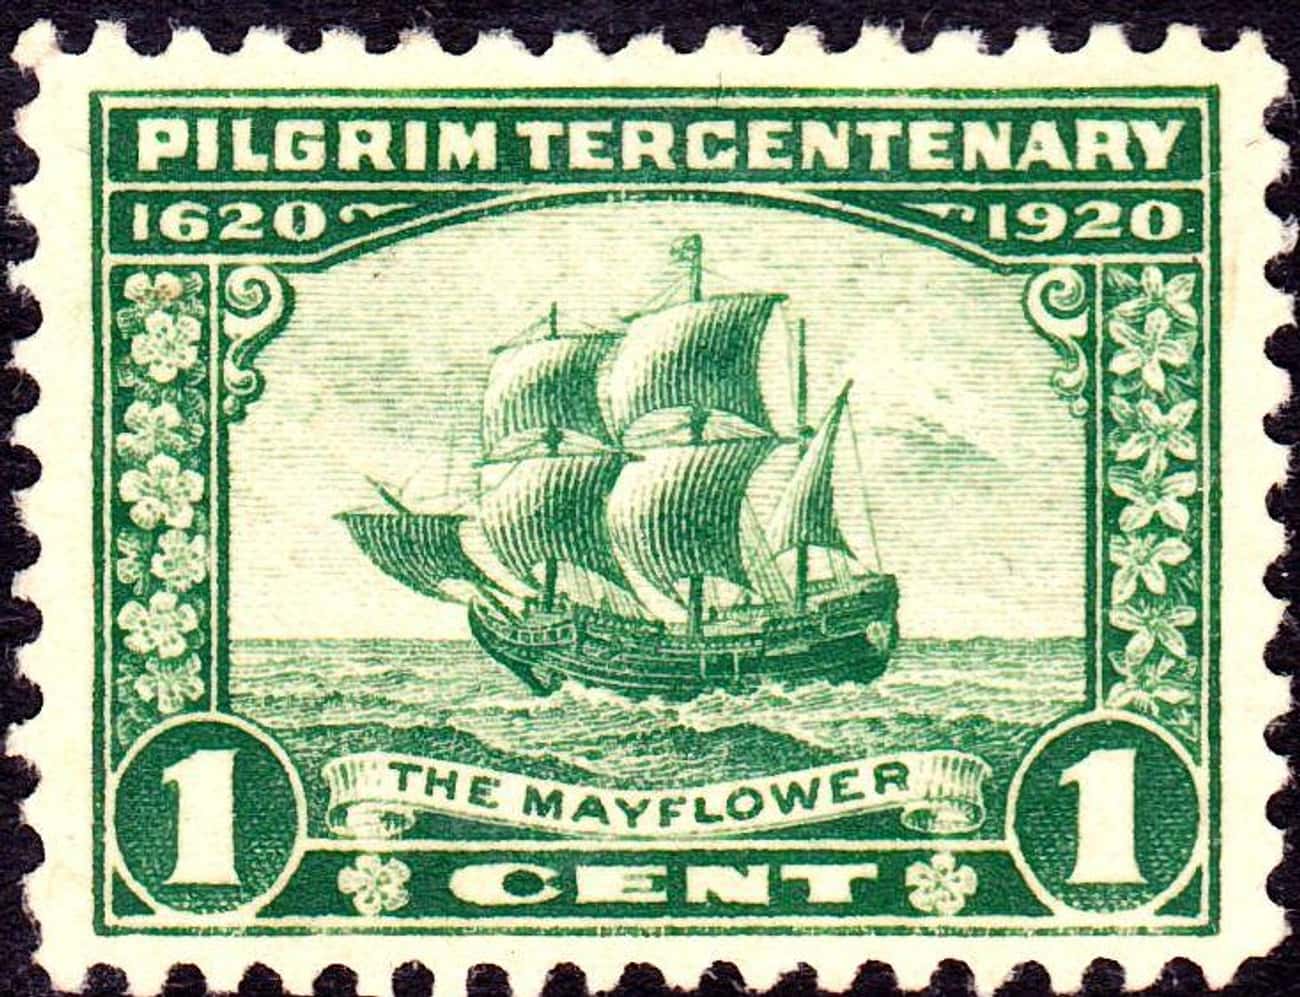 The Mayflower Only Landed on Plymouth Rock Because They Ran Out of Beer